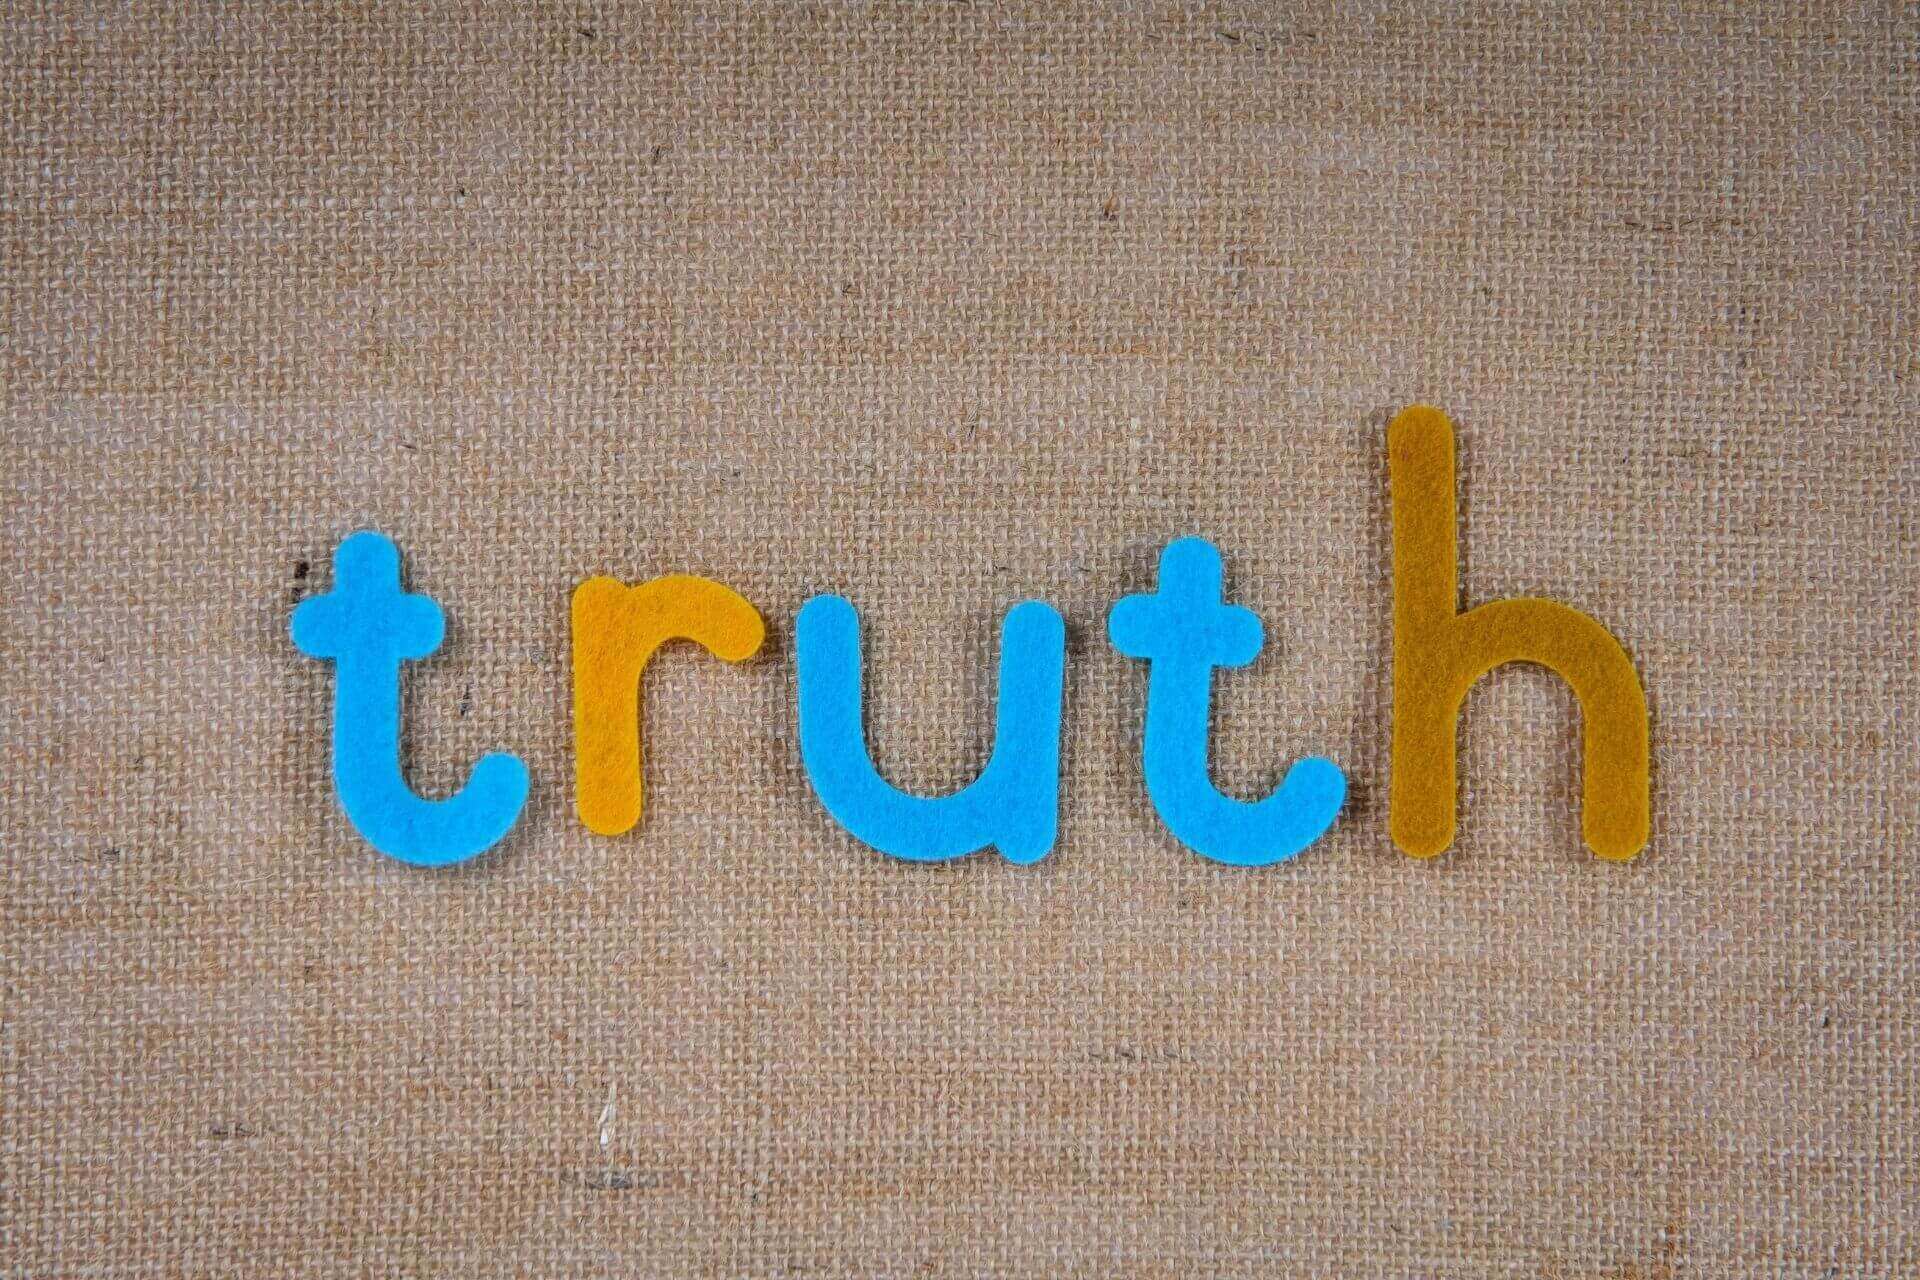 Heart to heart: 5 reasons why you should always tell the truth even when it is uncomfortable